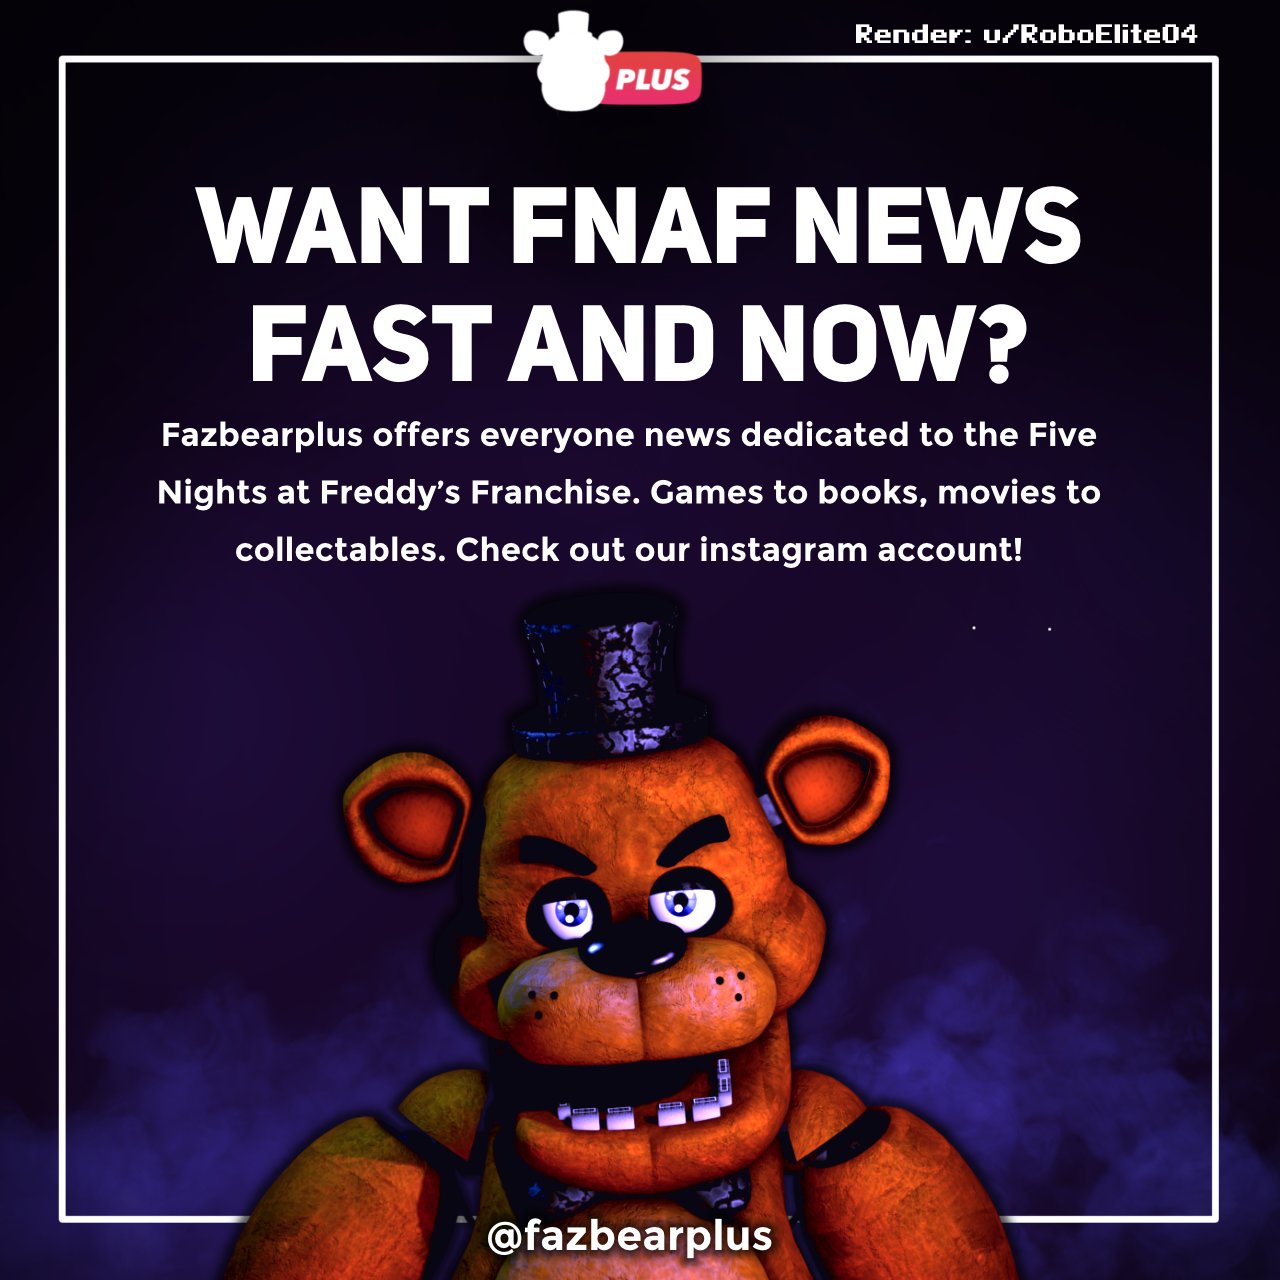 Five Nights At Freddy's 4: Expanded Edition Free Download - Fnaffangame